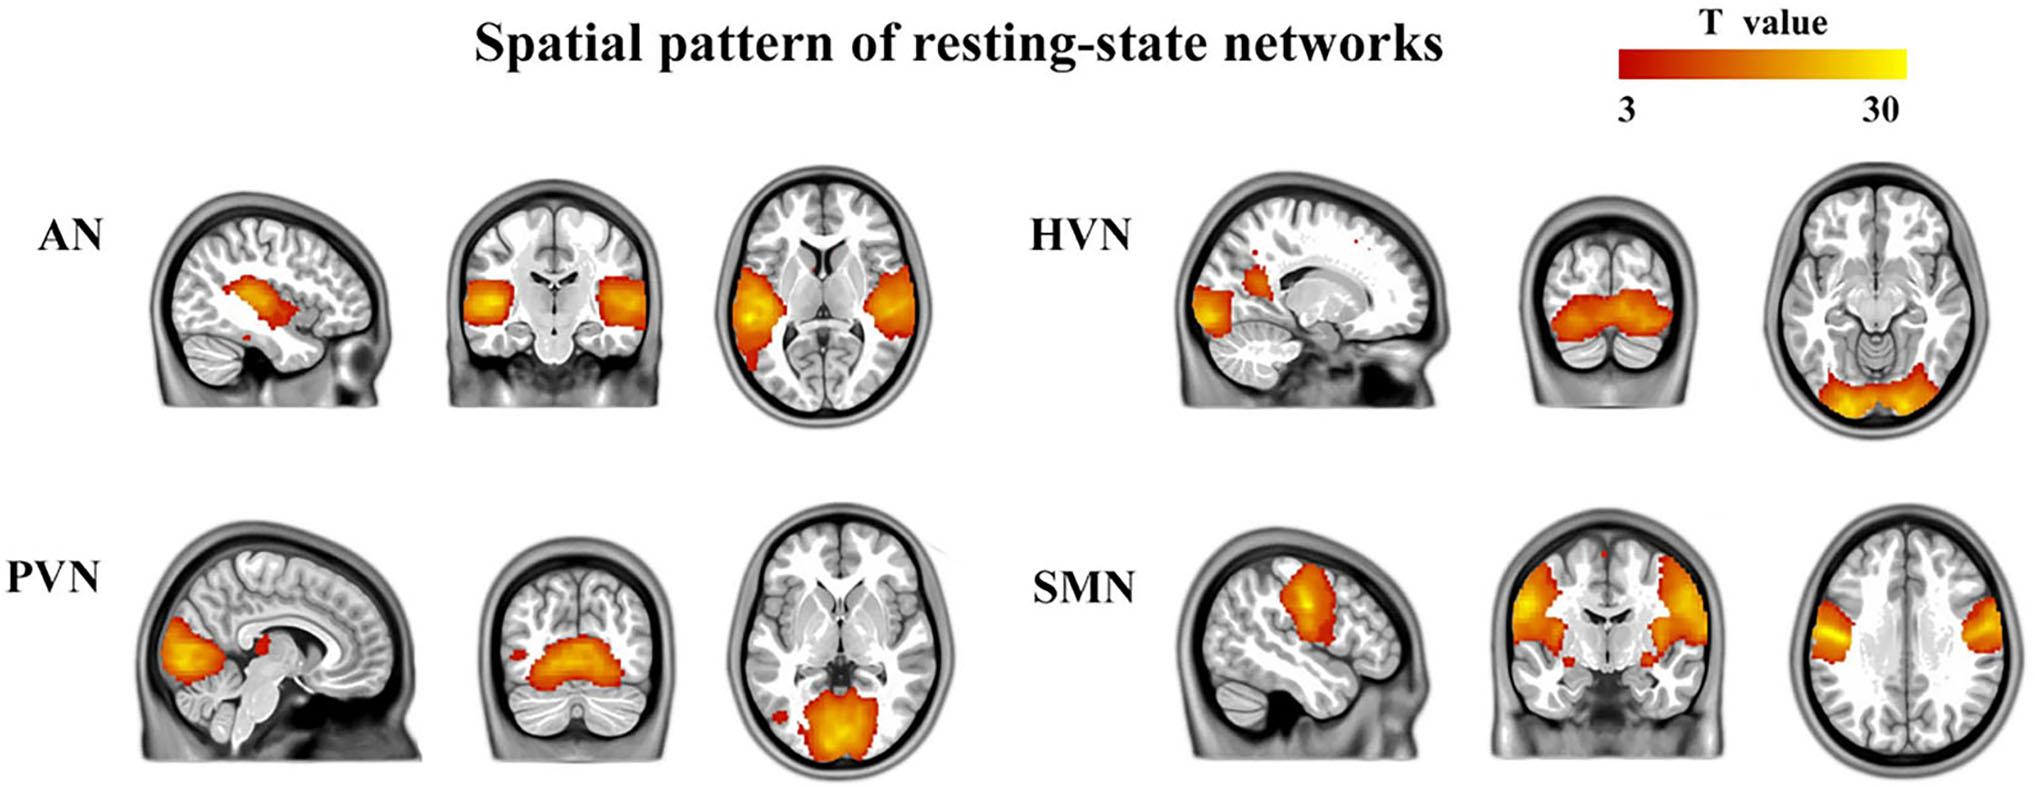 Frontiers Atypical Resting State Functional Connectivity Of Intra Inter Sensory Networks Is Related To Symptom Severity In Young Boys With Autism Spectrum Disorder Physiology